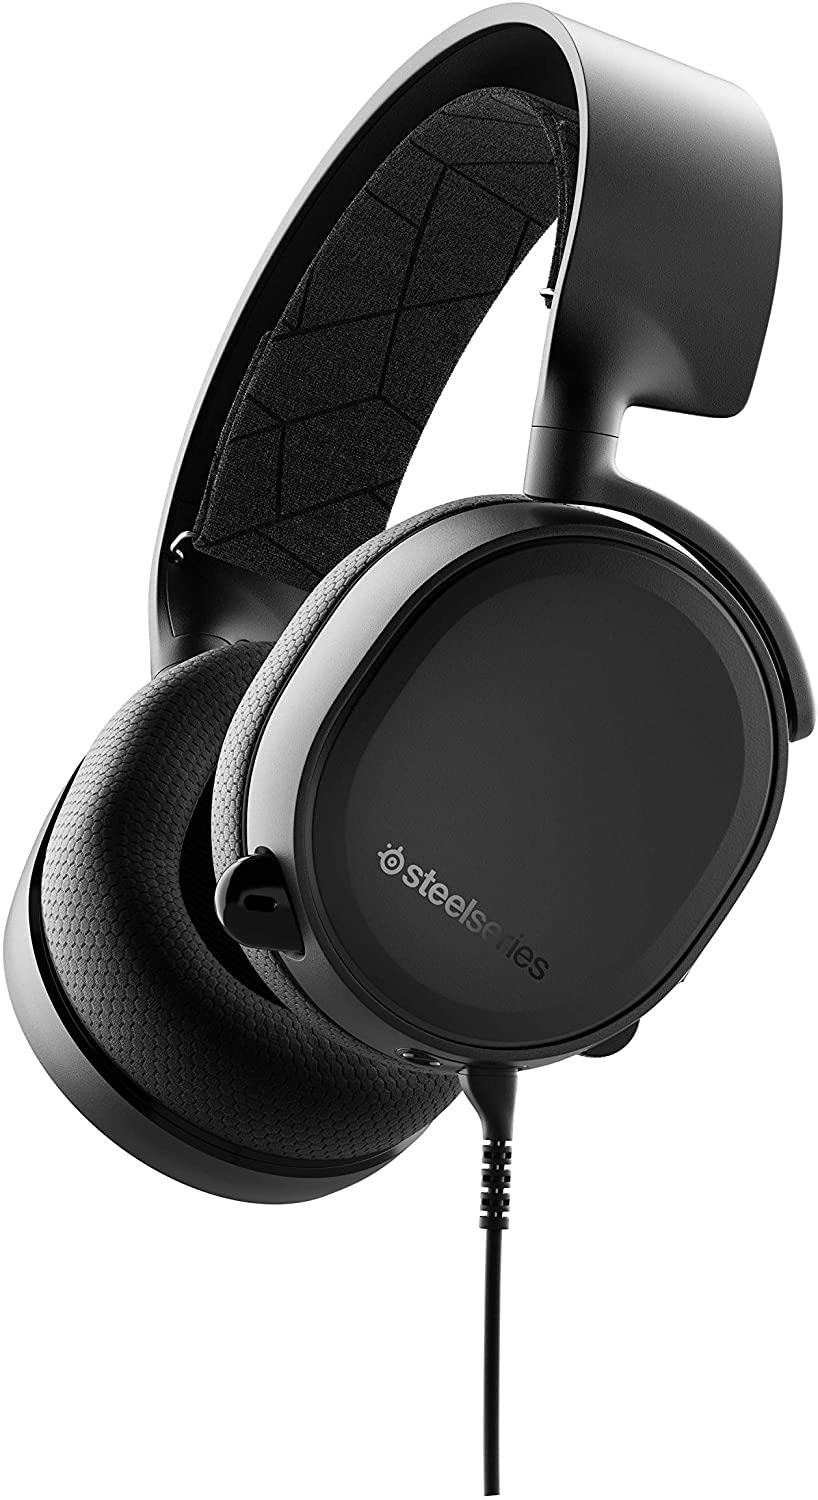 SteelSeries Arctis 3 Wired Gaming Headset for $40 $39.99